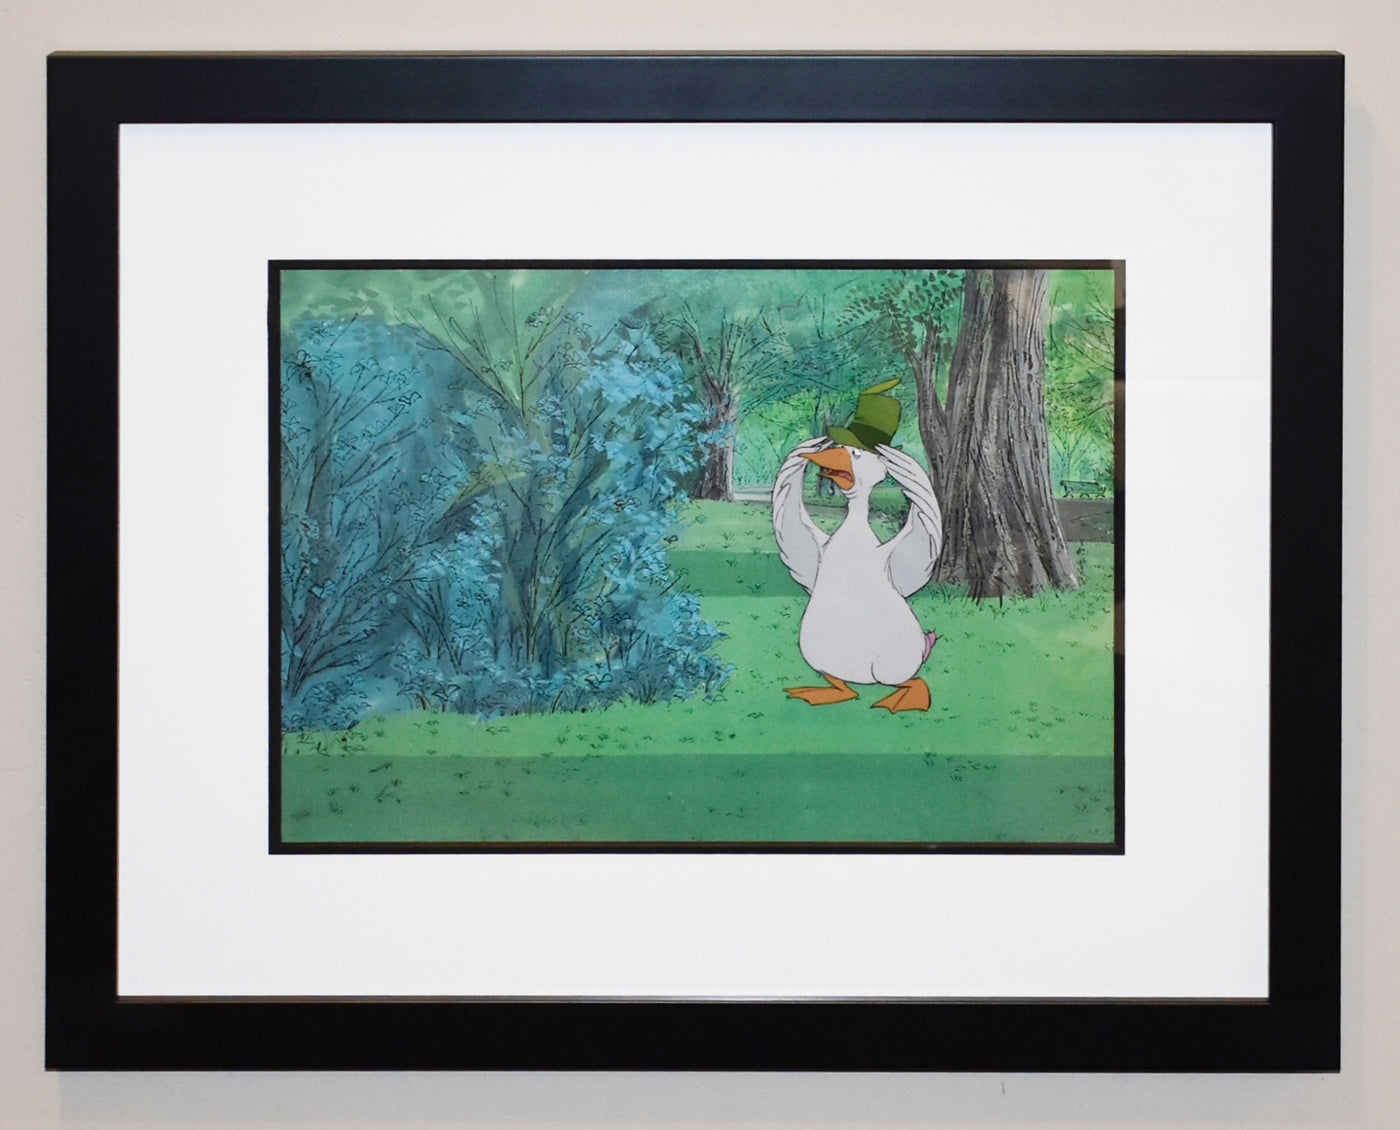 Original Walt Disney Production Cel from The Aristocats featuring Uncle Waldo